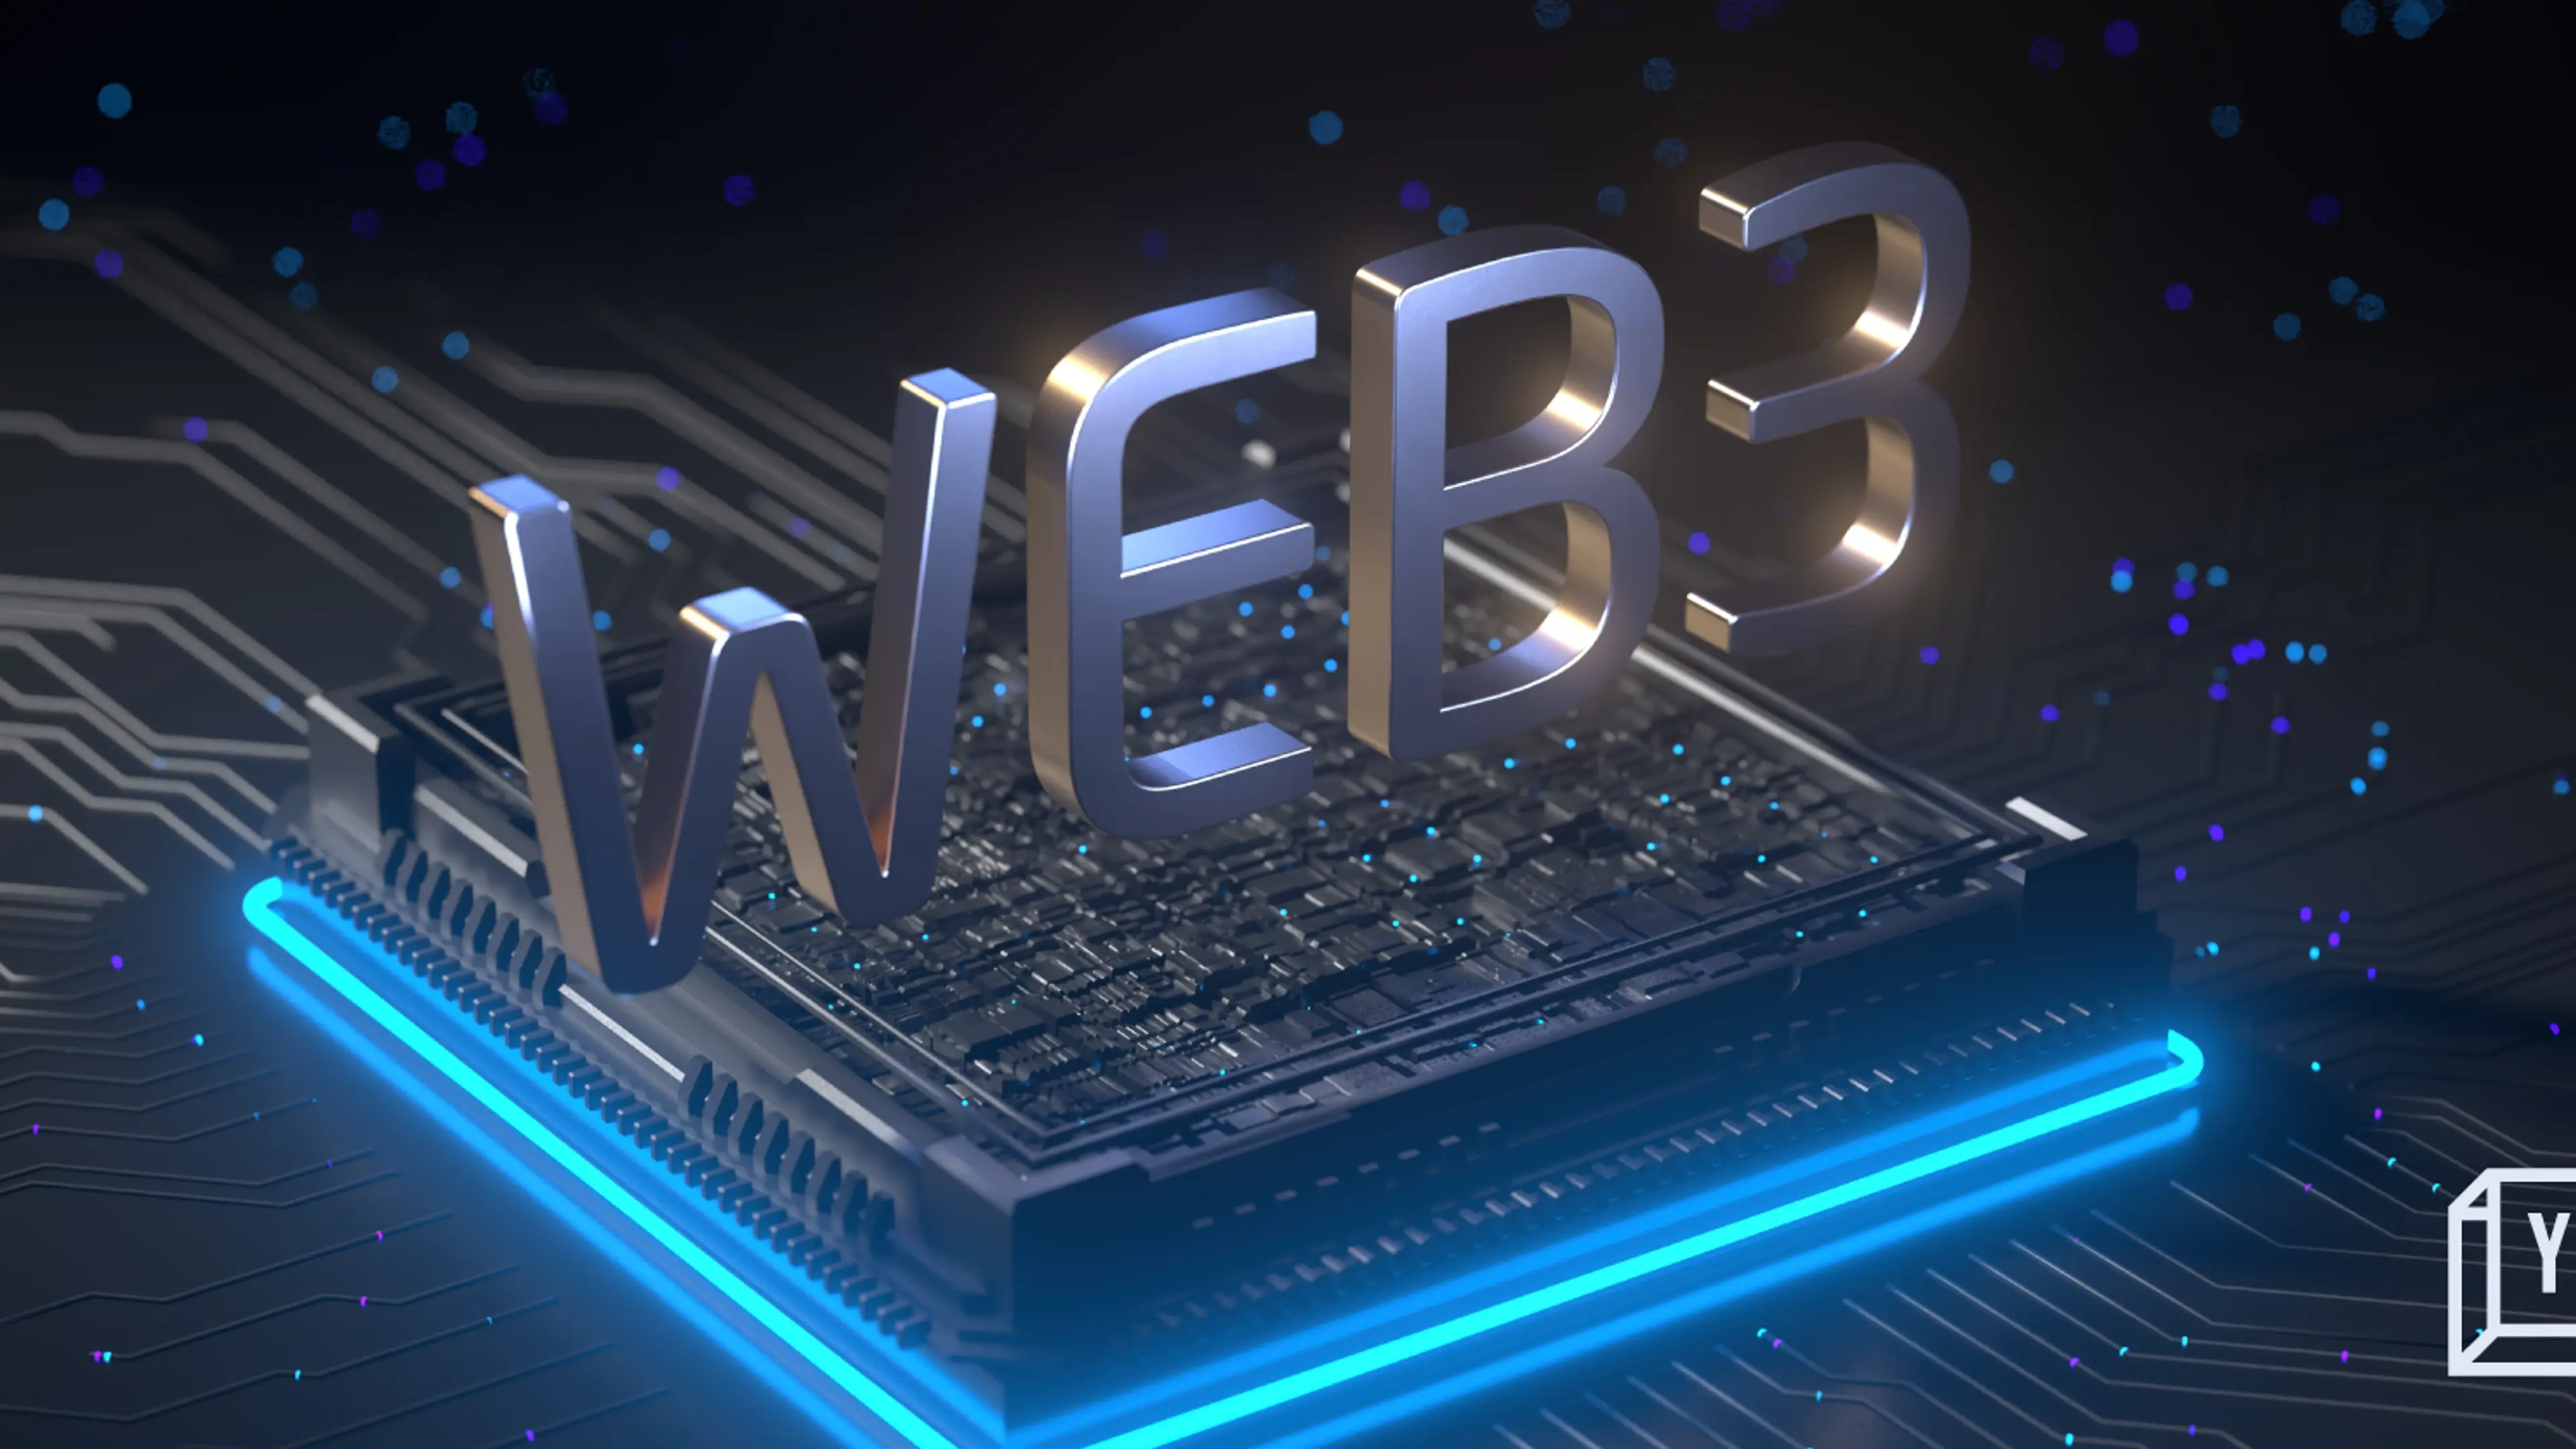 New to Web3? Here’s some basic Web3 lingo to get you started